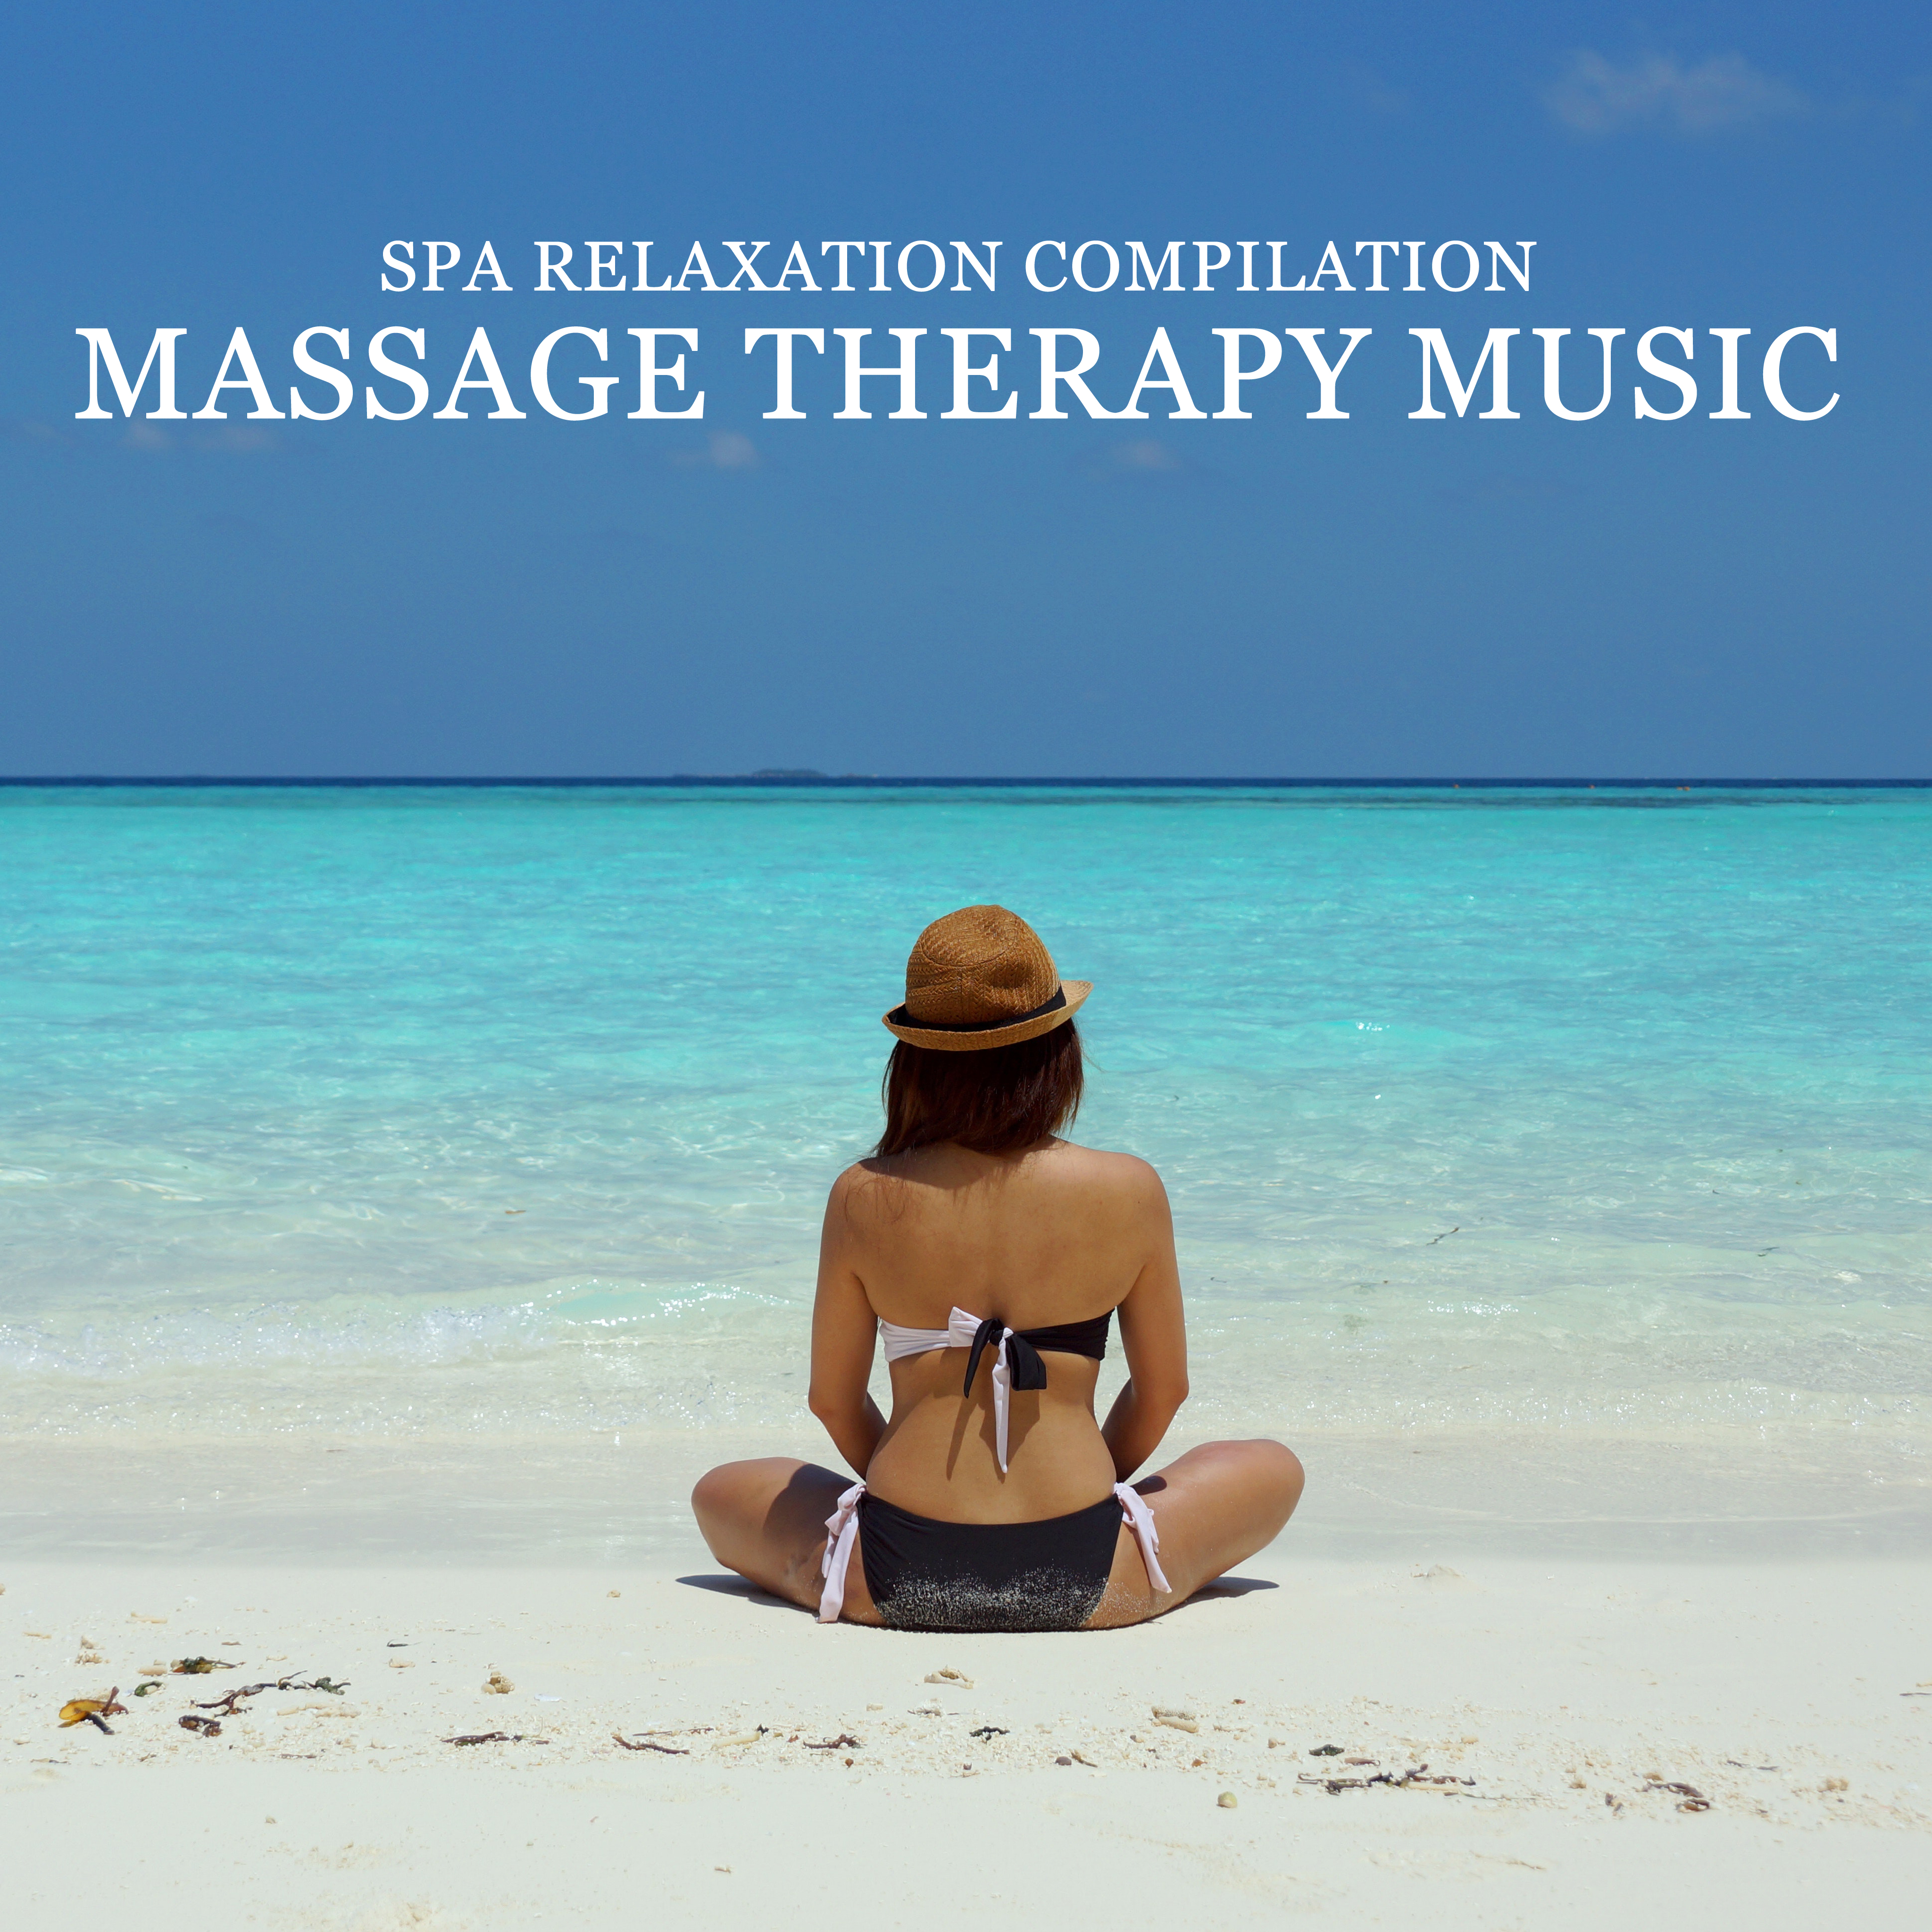 2018 A Spa Relaxation Compilation - Massage Therapy Music